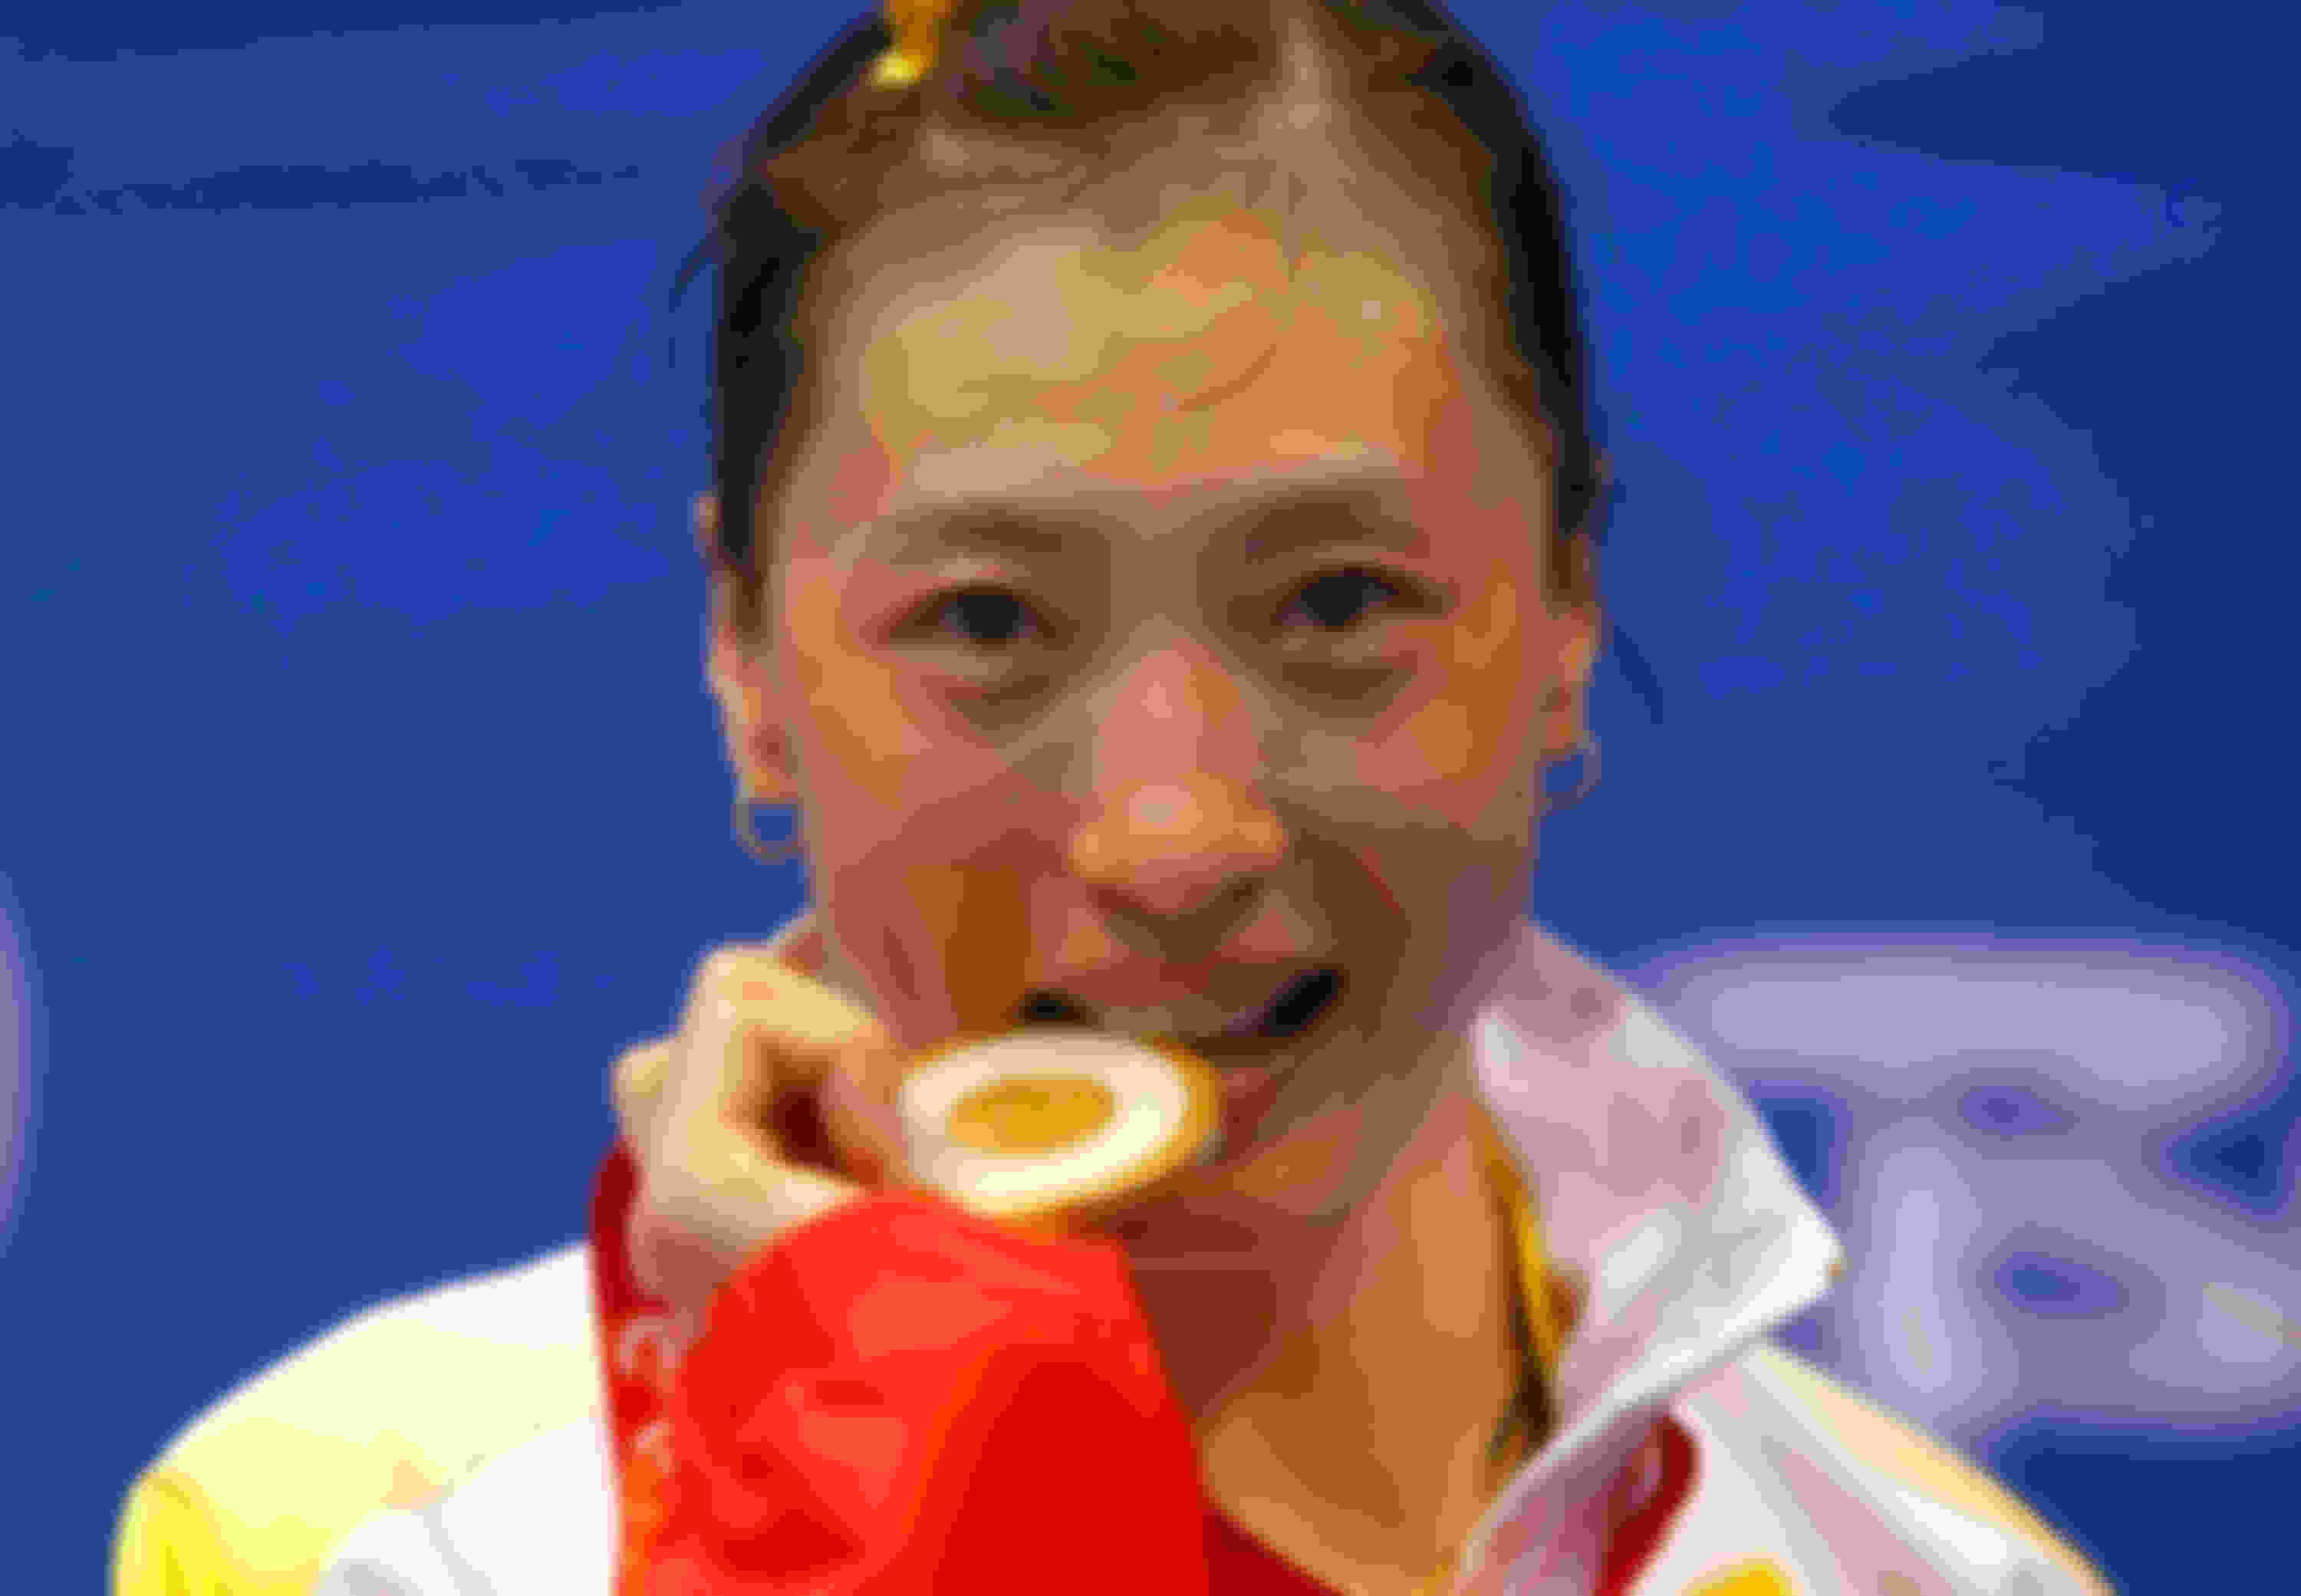 Zhang Ning is the first woman to win consecutive Olympic badminton singles gold medals.